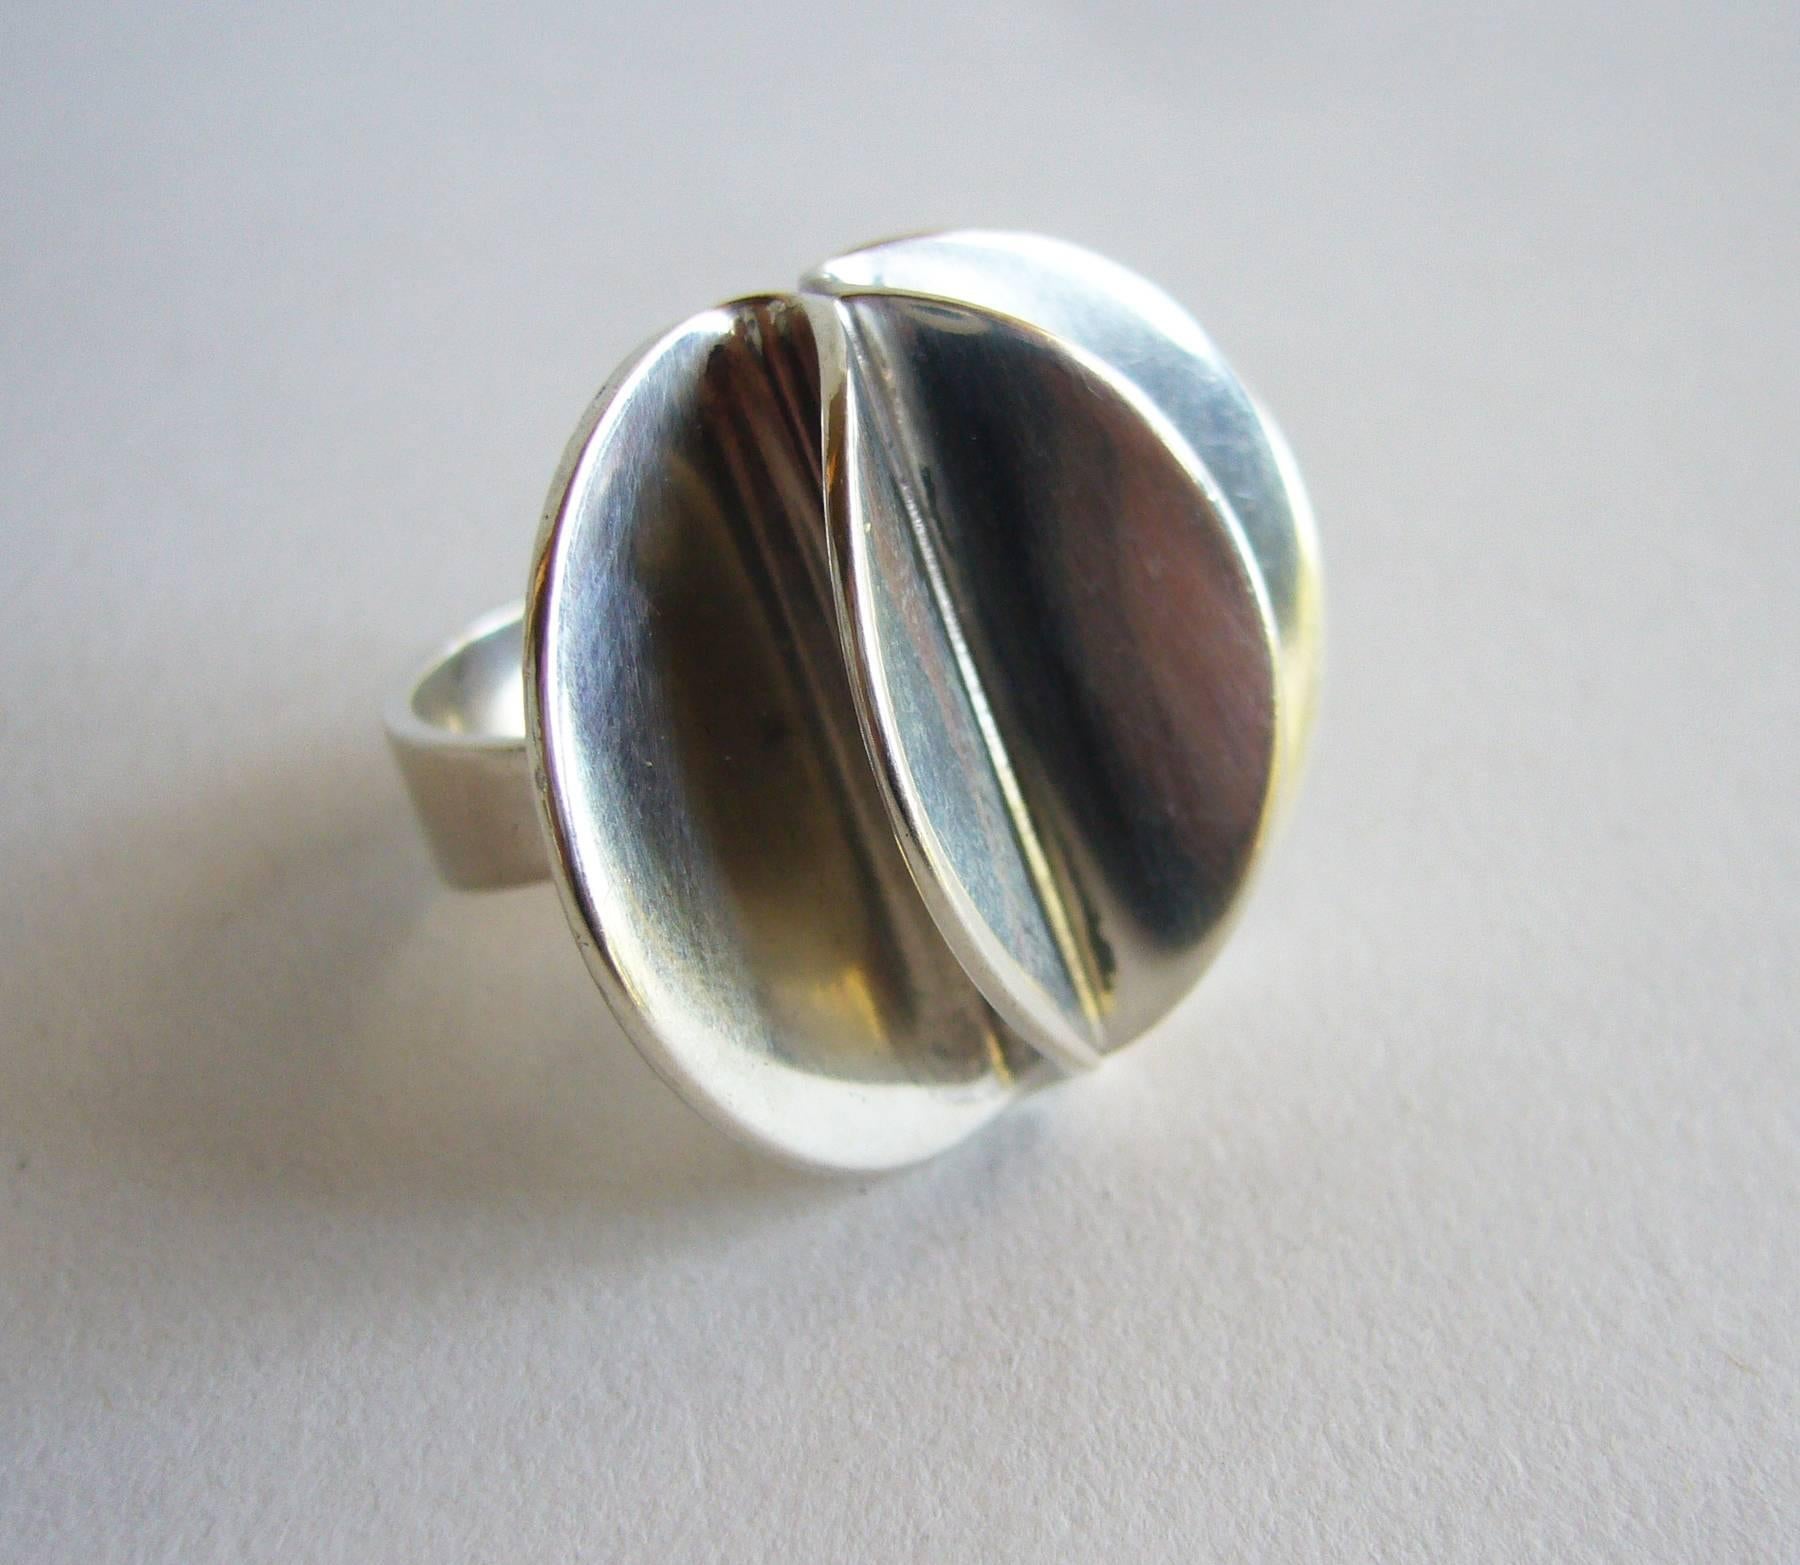 Sterling silver petal ring created by Theresia Horvselv for Alton of Sweden.  Ring is a finger size 4.5 and can easily be resized if need be.  A great, unconventional alternate to a modern day engagement or wedding ring.  Signed Theresia, Alton,